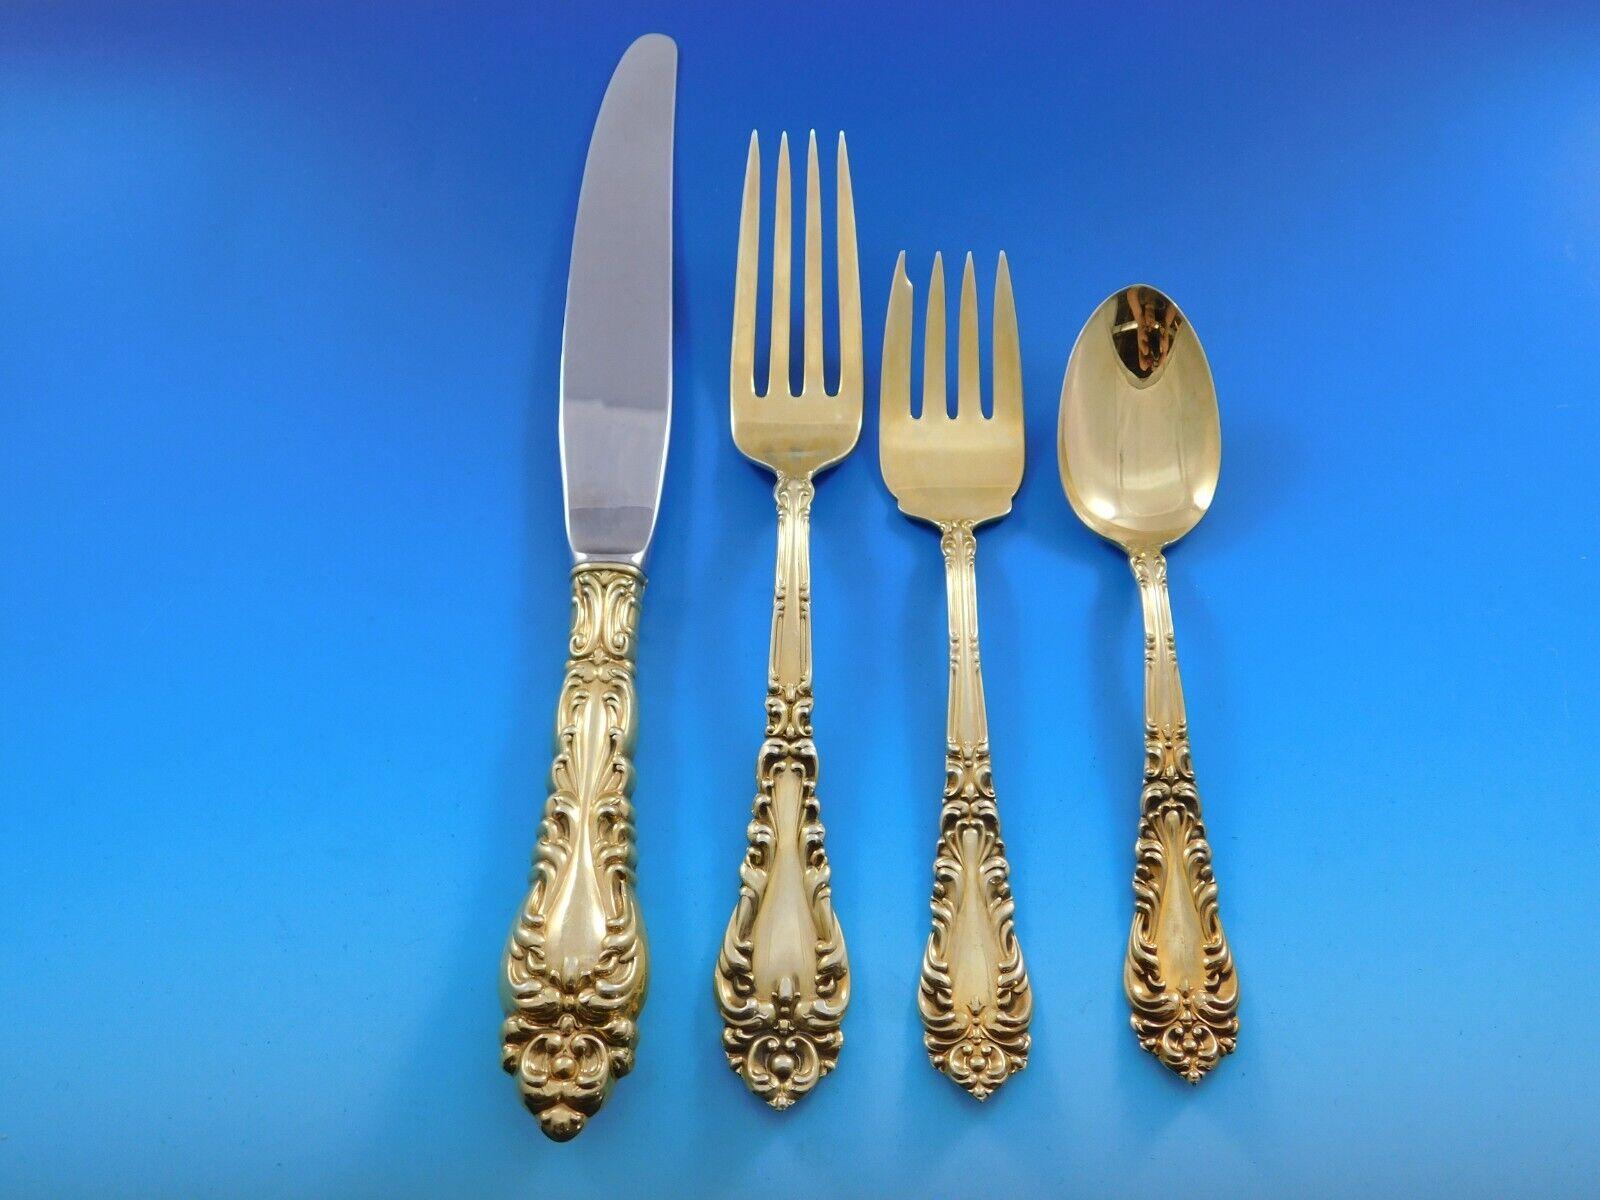 Monumental Dinner and Luncheon size Athene by Amston Gold Vermeil Sterling silver Flatware set for 12 - 171 pieces. Cet ensemble comprend :

12 grands couteaux de table, 9 3/4